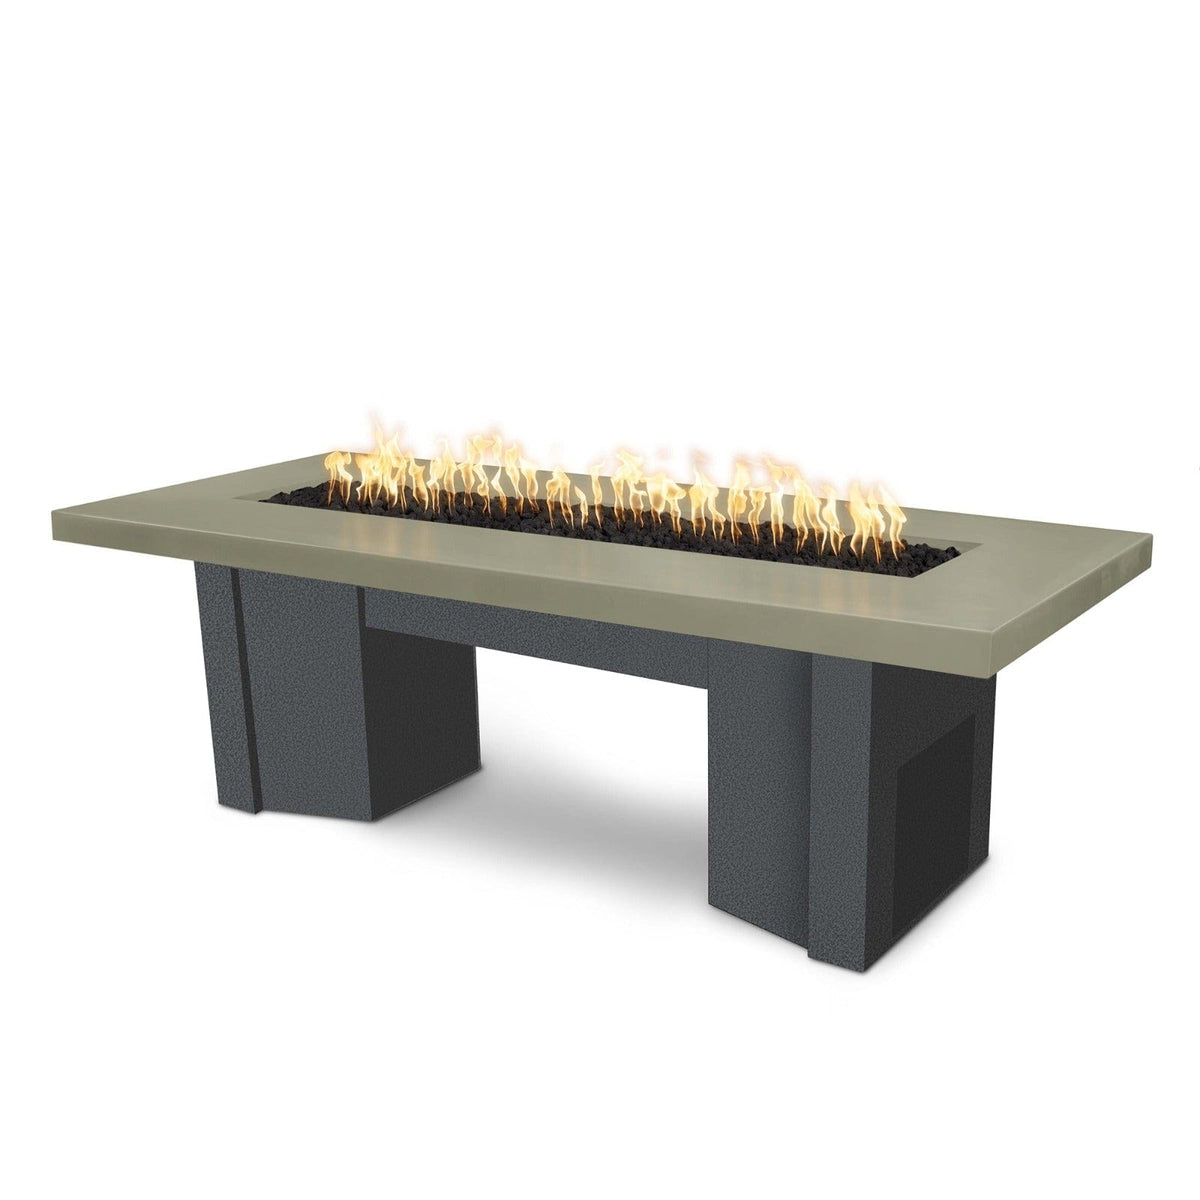 The Outdoor Plus Fire Features Ash (-ASH) / Silver Vein Powder Coated Steel (-SLV) The Outdoor Plus 60&quot; Alameda Fire Table Smooth Concrete in Natural Gas - Flame Sense System with Push Button Spark Igniter / OPT-ALMGFRC60FSEN-NG